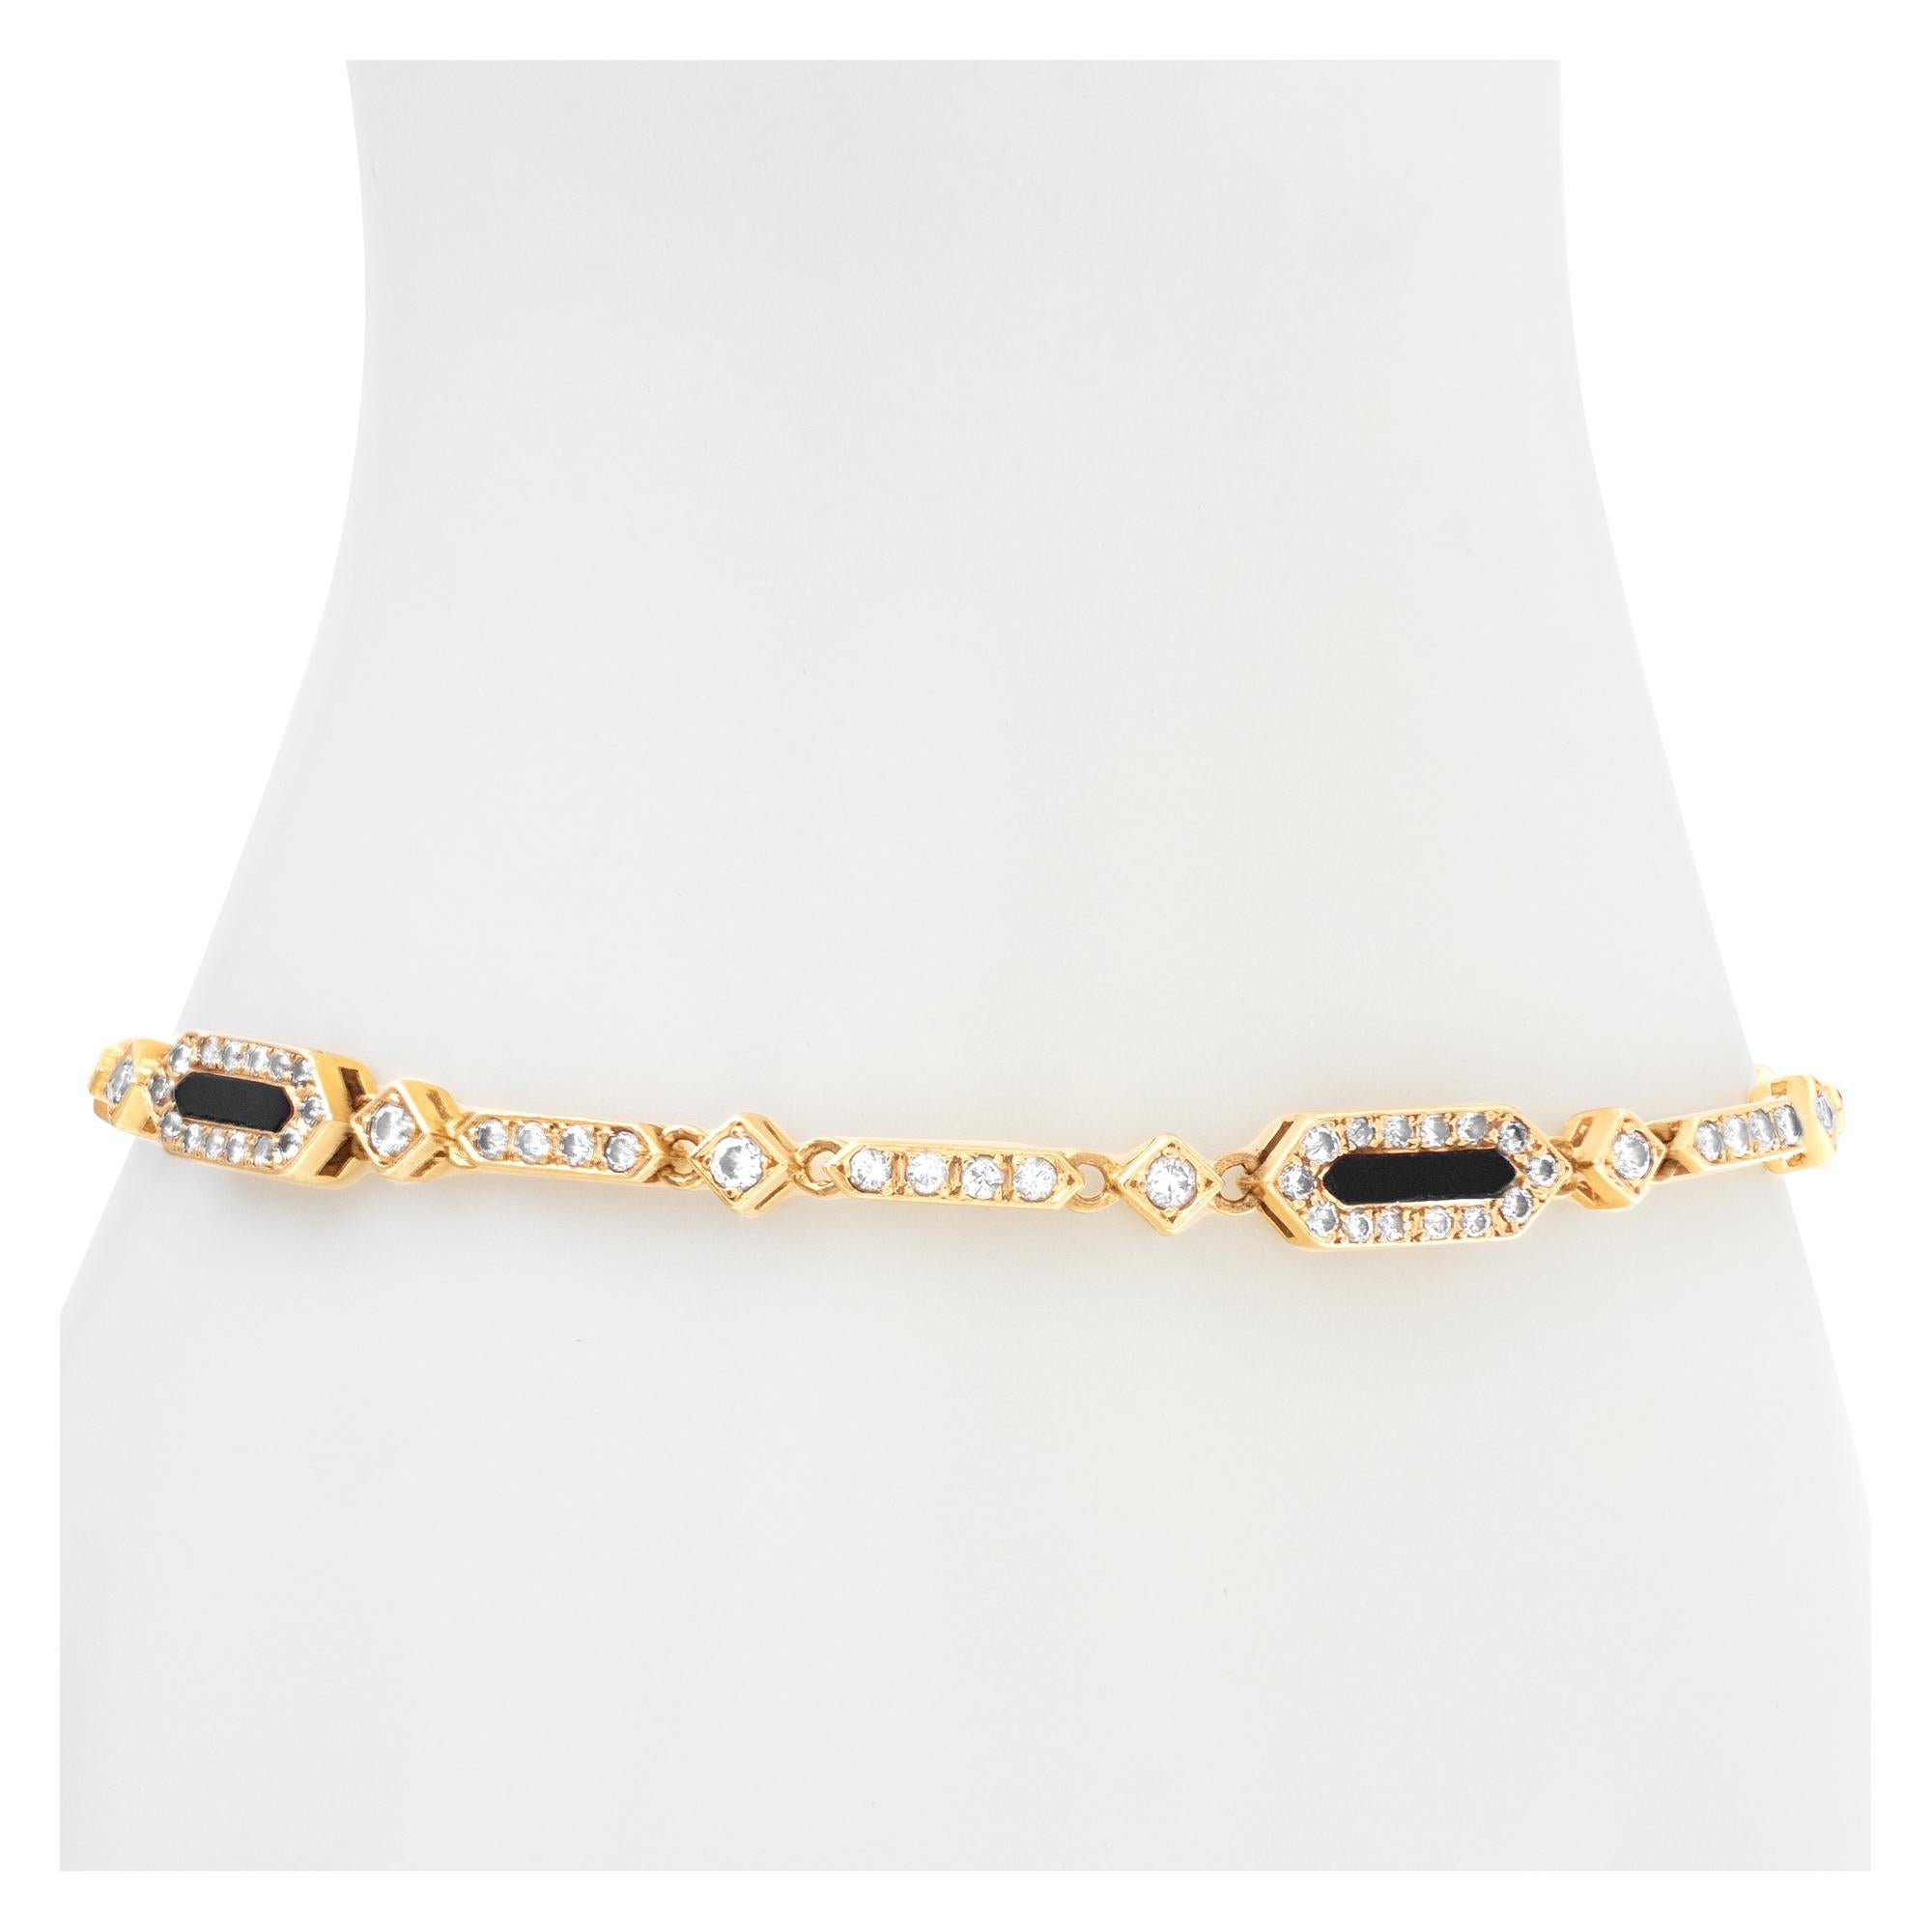 Elegant onyx and diamond bracelet in 18k gold, with approximately 1.50 carat round brlliant cut diamonds, estimate: G-H color, VS clarity. Length 7.25 inches with security chain.
